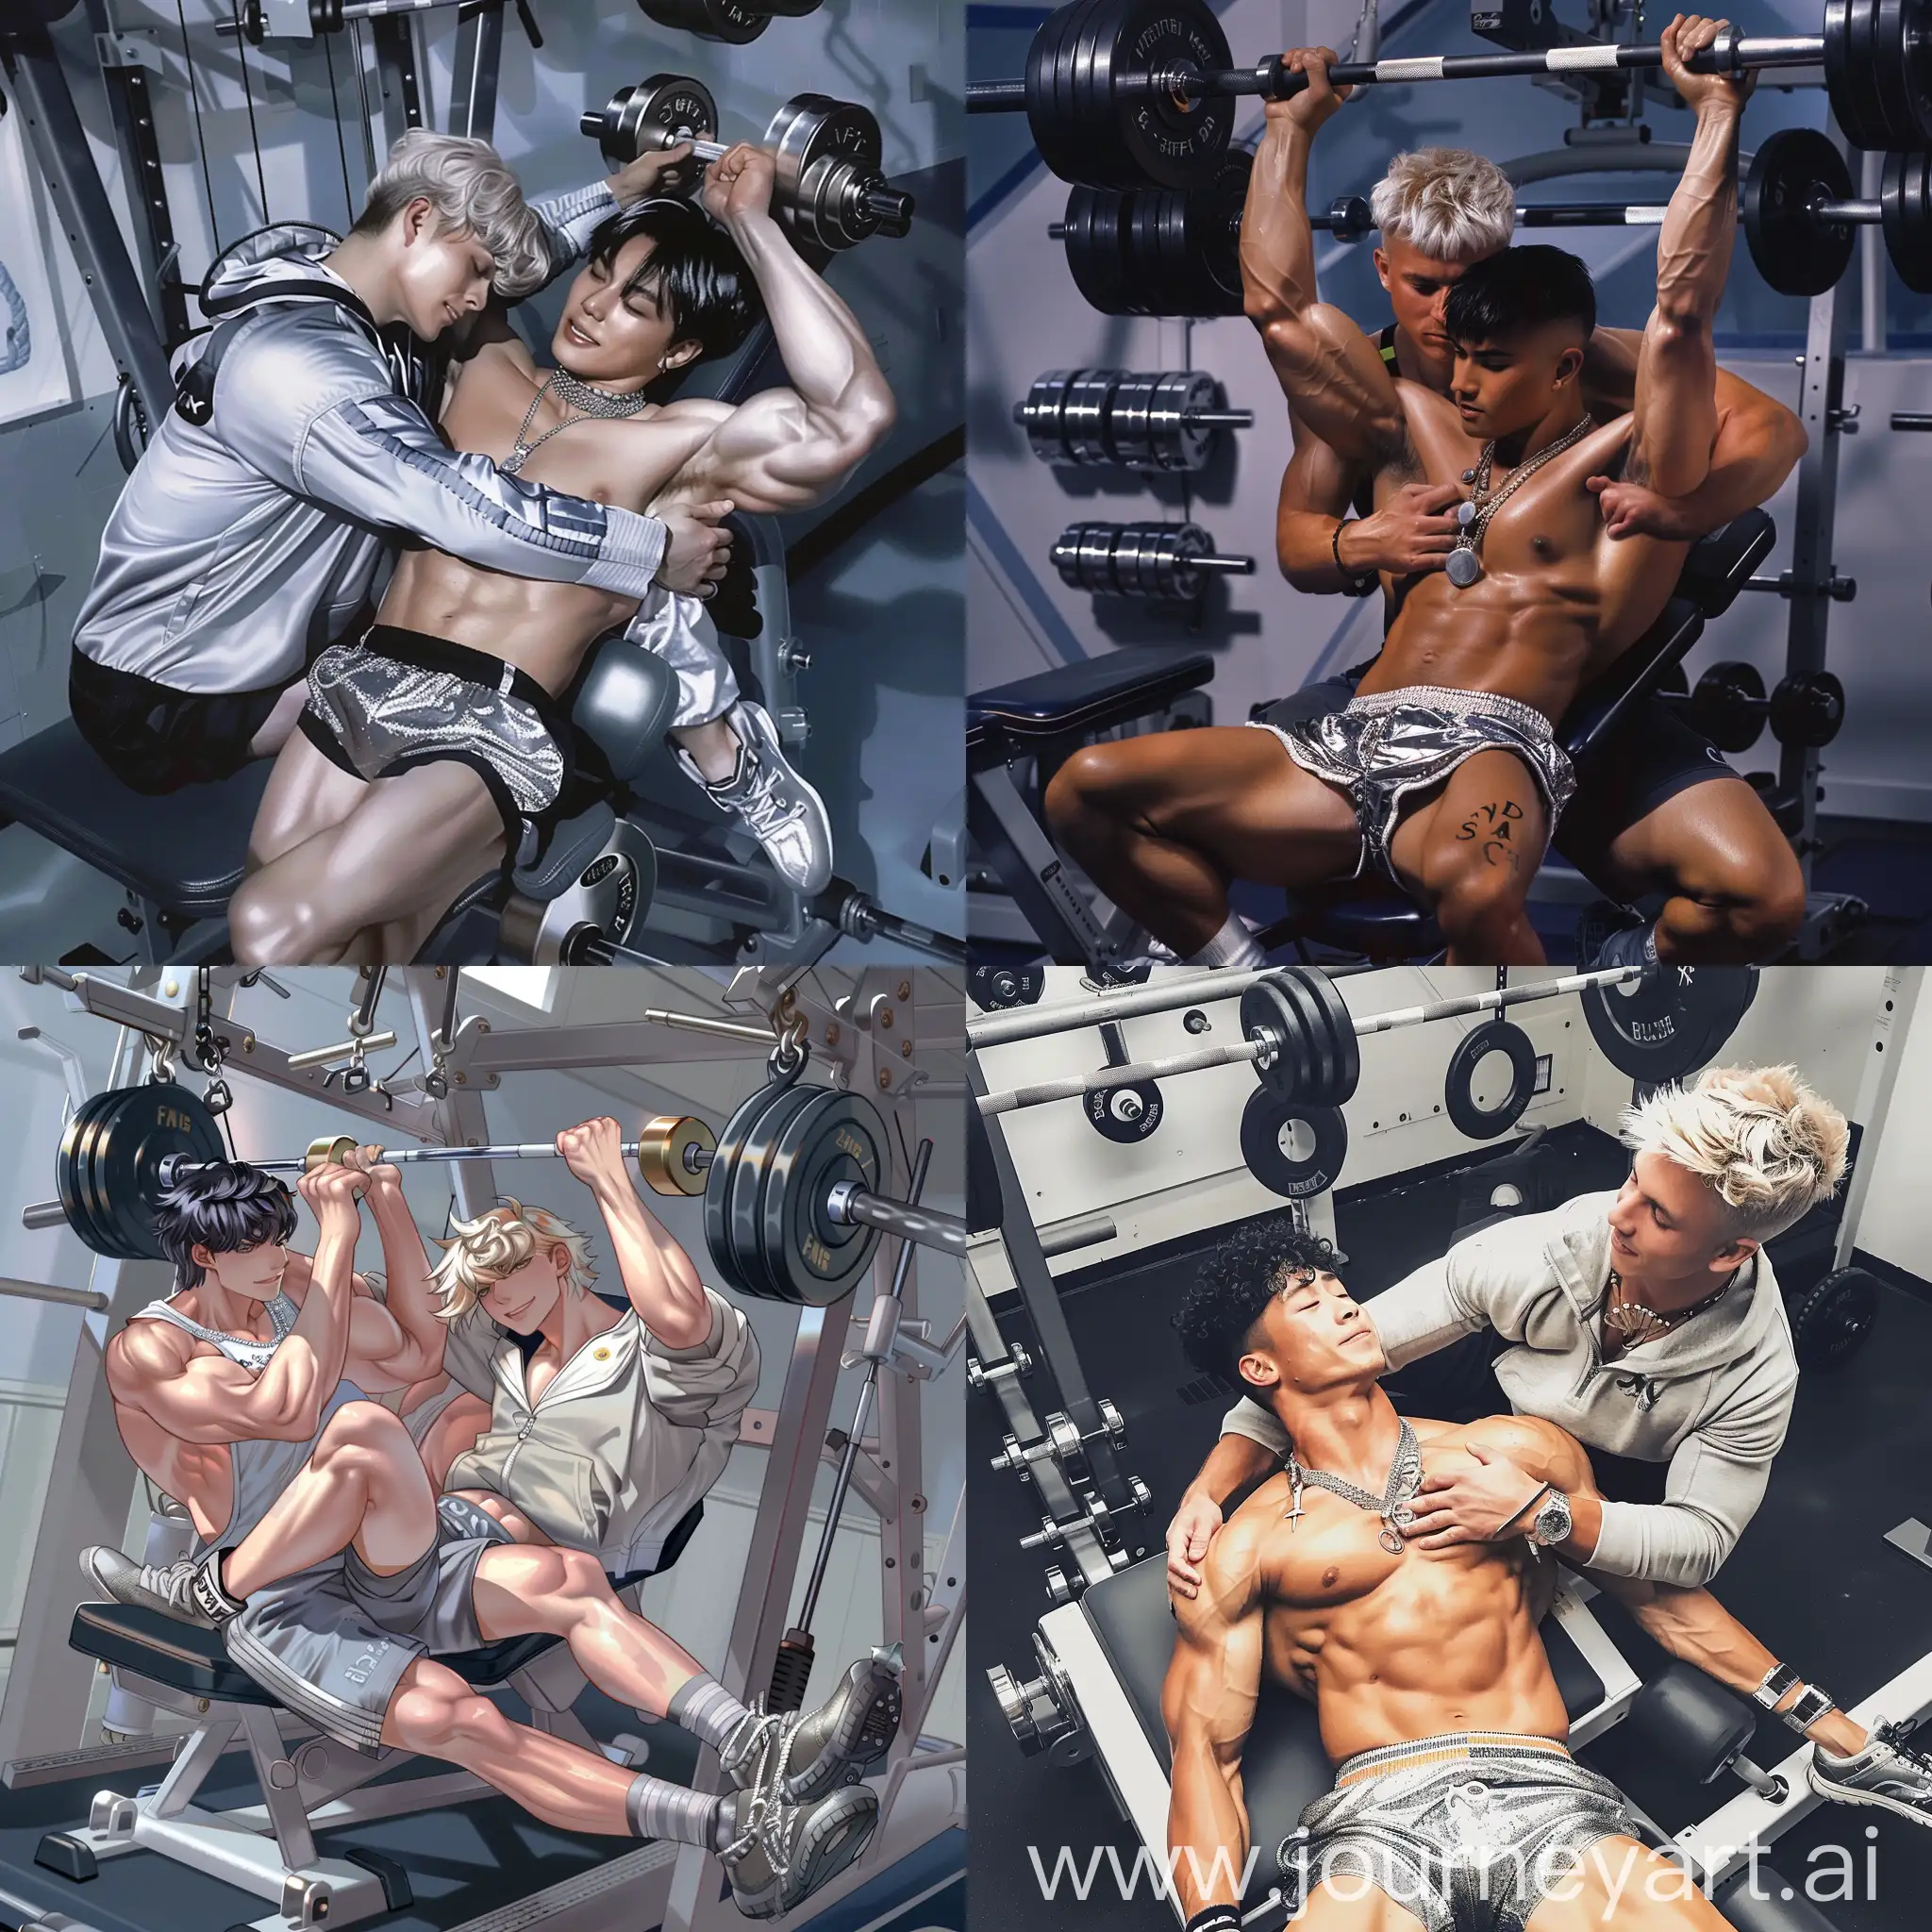 strong young male, black hair, siver short, silver shoes, silver necklace, lying on a fitness machine, pulling weights in the air, hugged by handsome american male sailor with blond hair, surrounded by fitness attributes